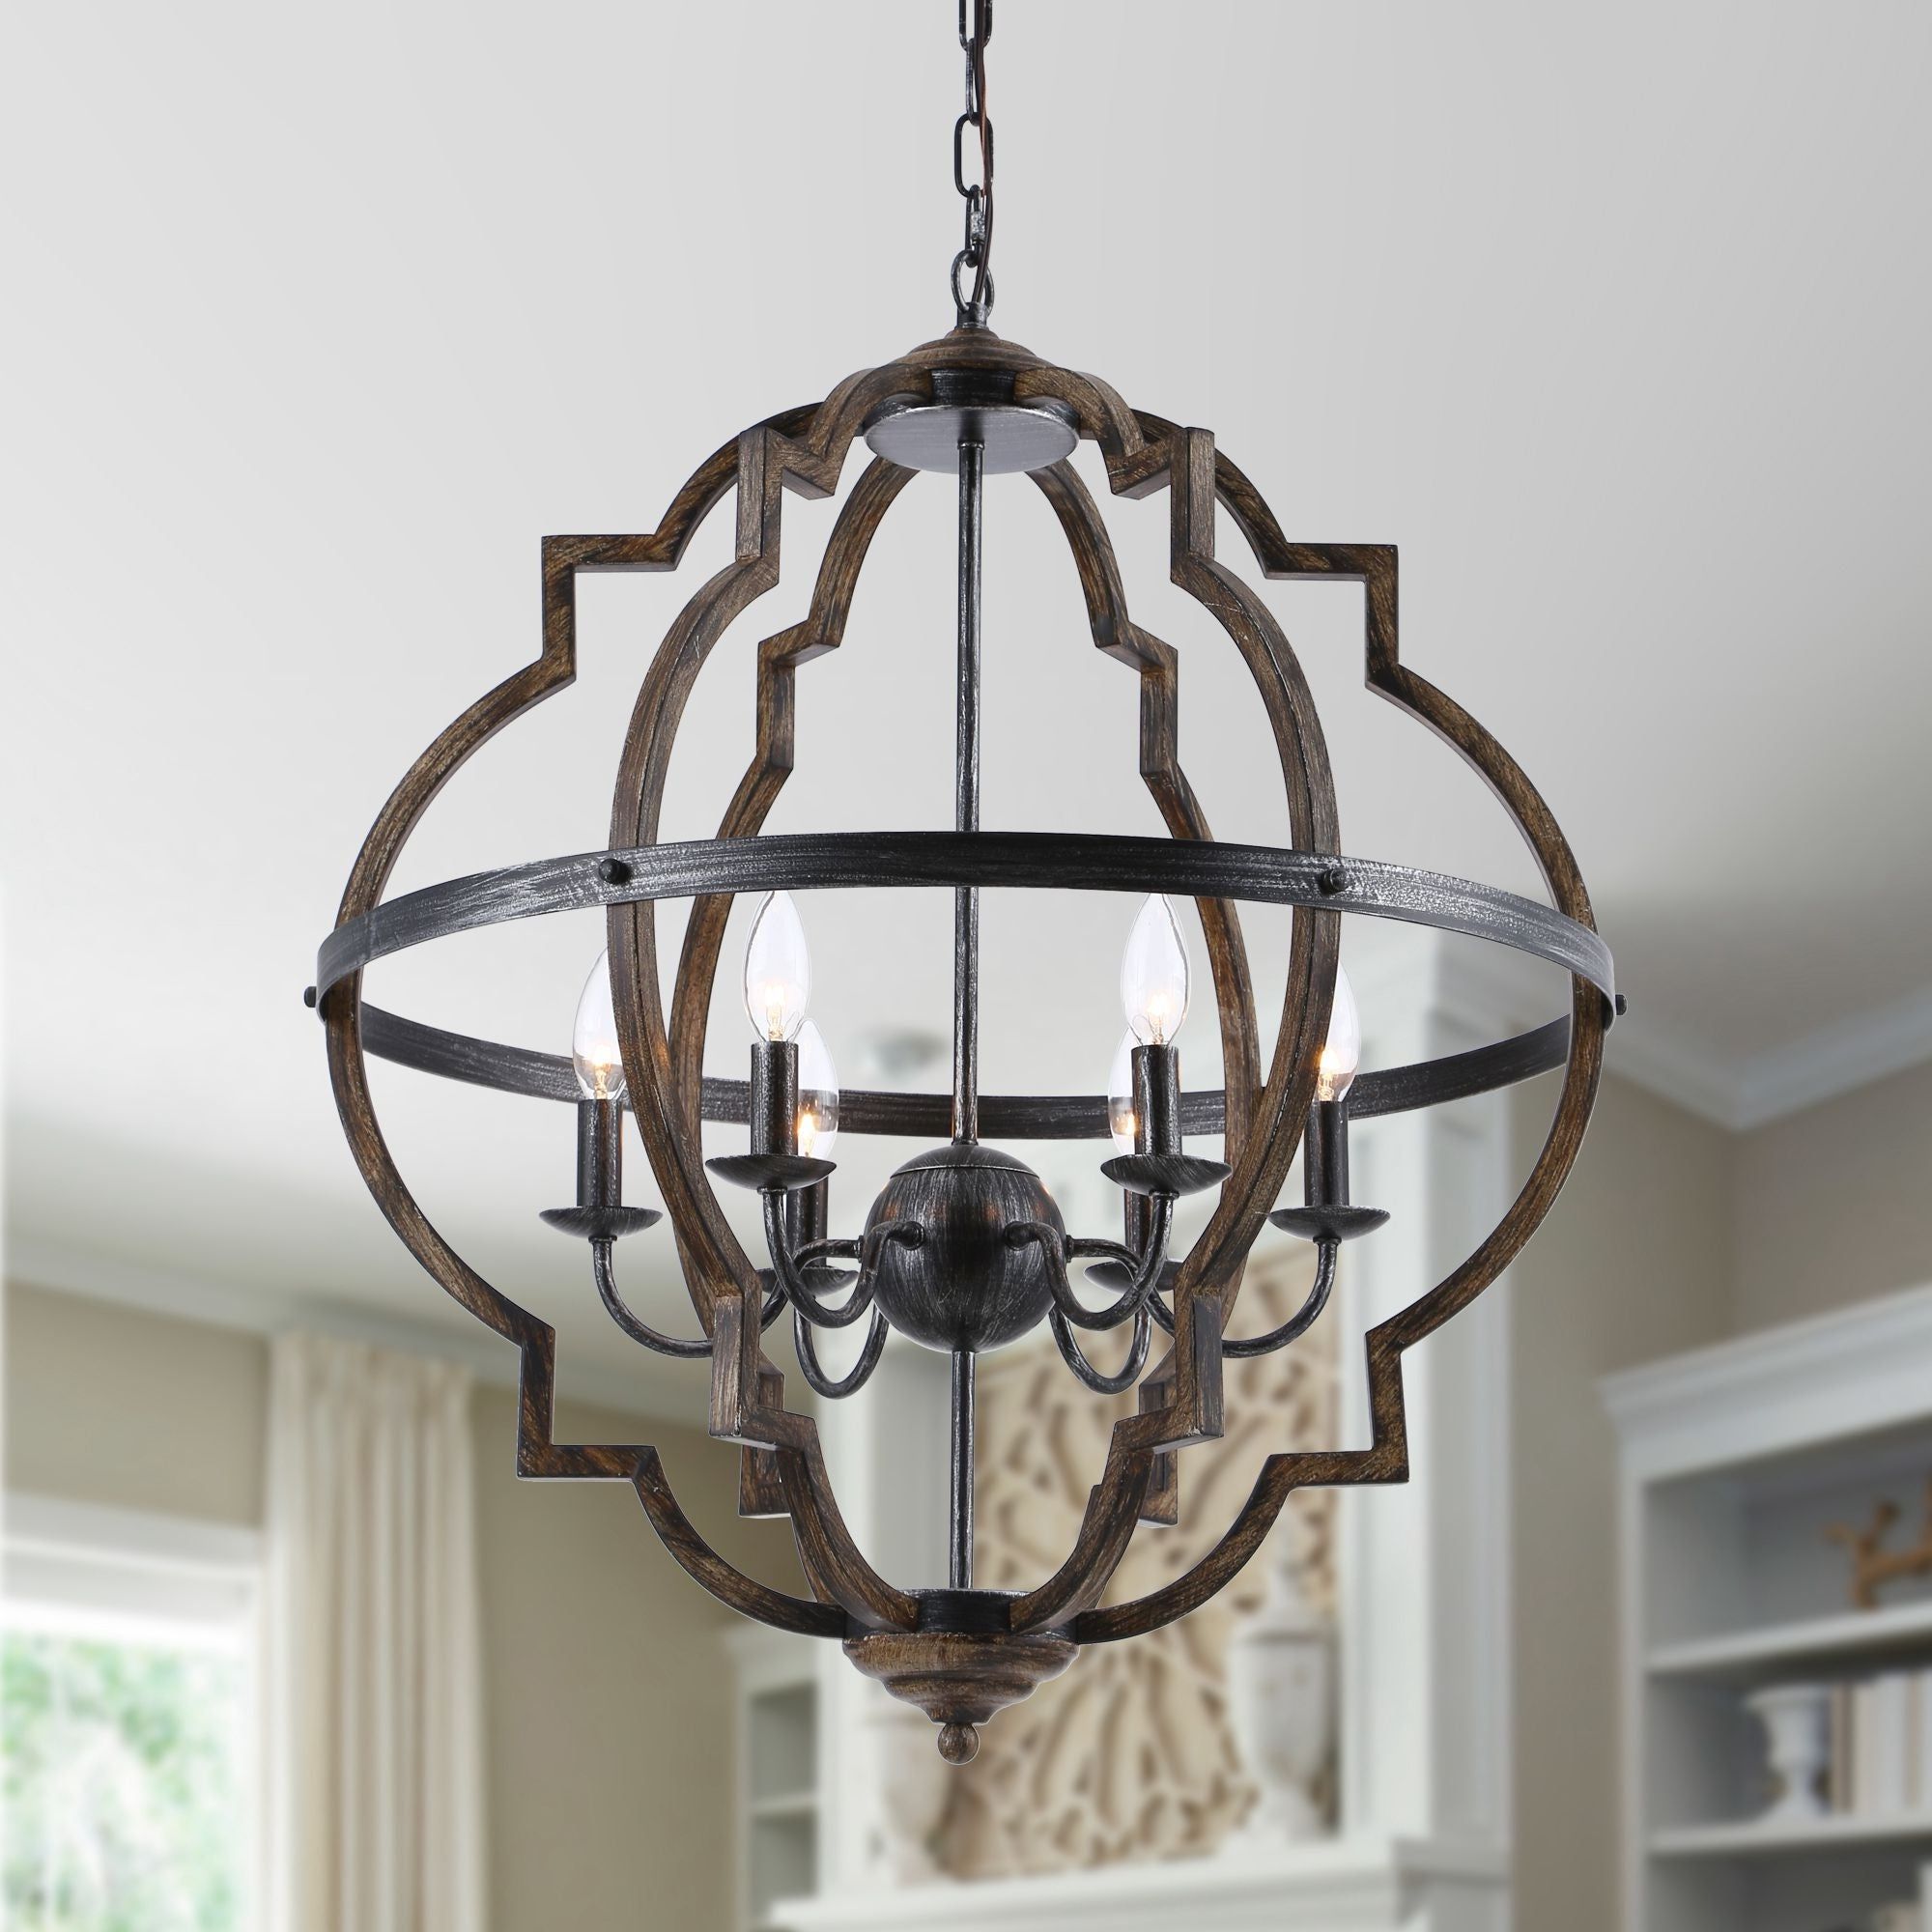 6 Light Distressed Black And Brushed Wood Lantern Geometric Chandelier –  Overstock – 33465791 Pertaining To Most Current Distressed Black Lantern Chandeliers (View 4 of 15)